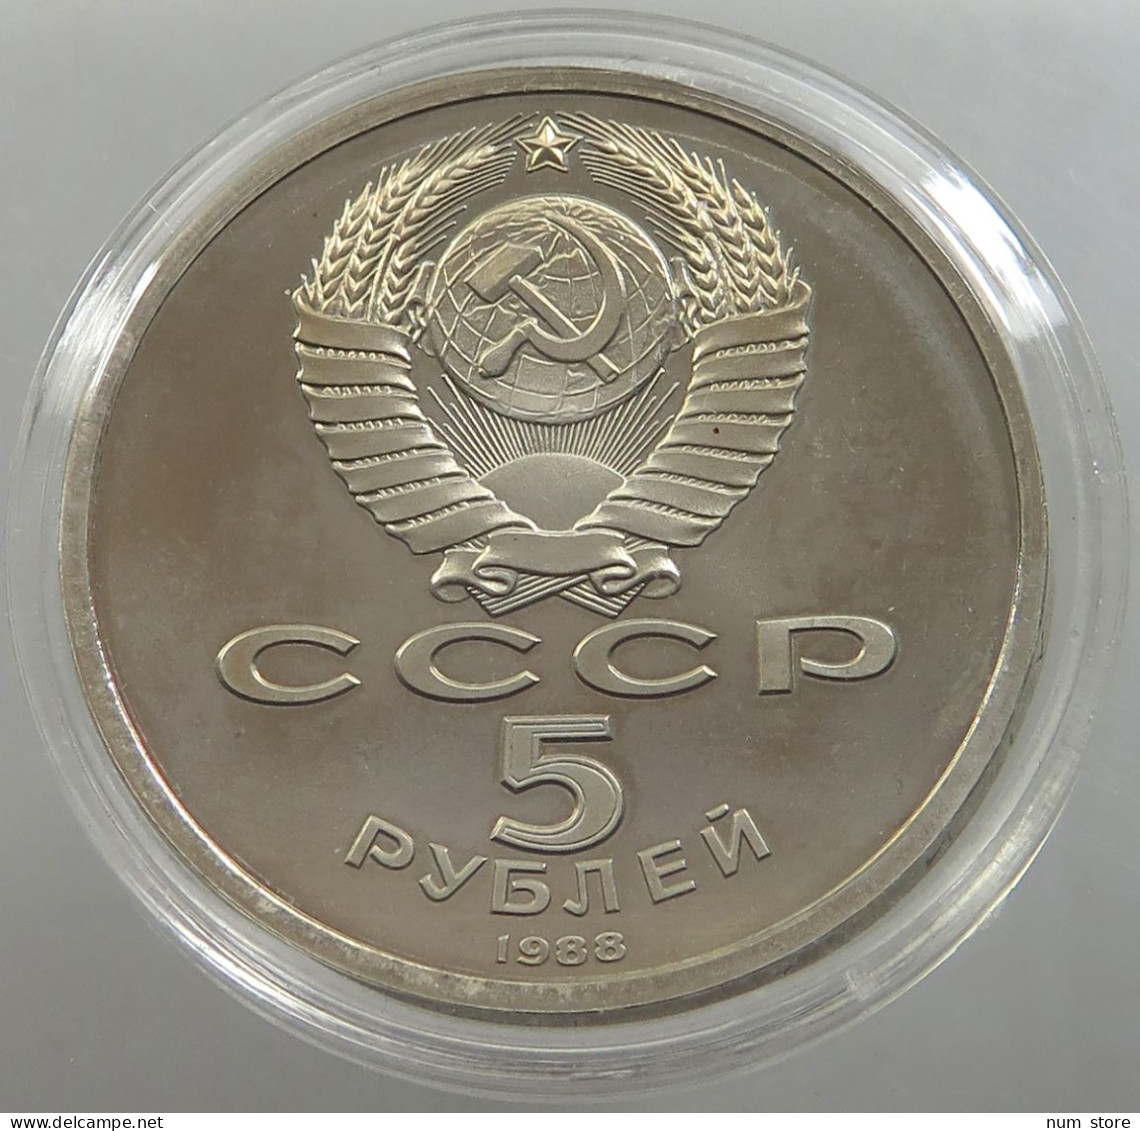 RUSSIA USSR 5 ROUBLES 1988 PROOF #sm14 0451 - Rusland